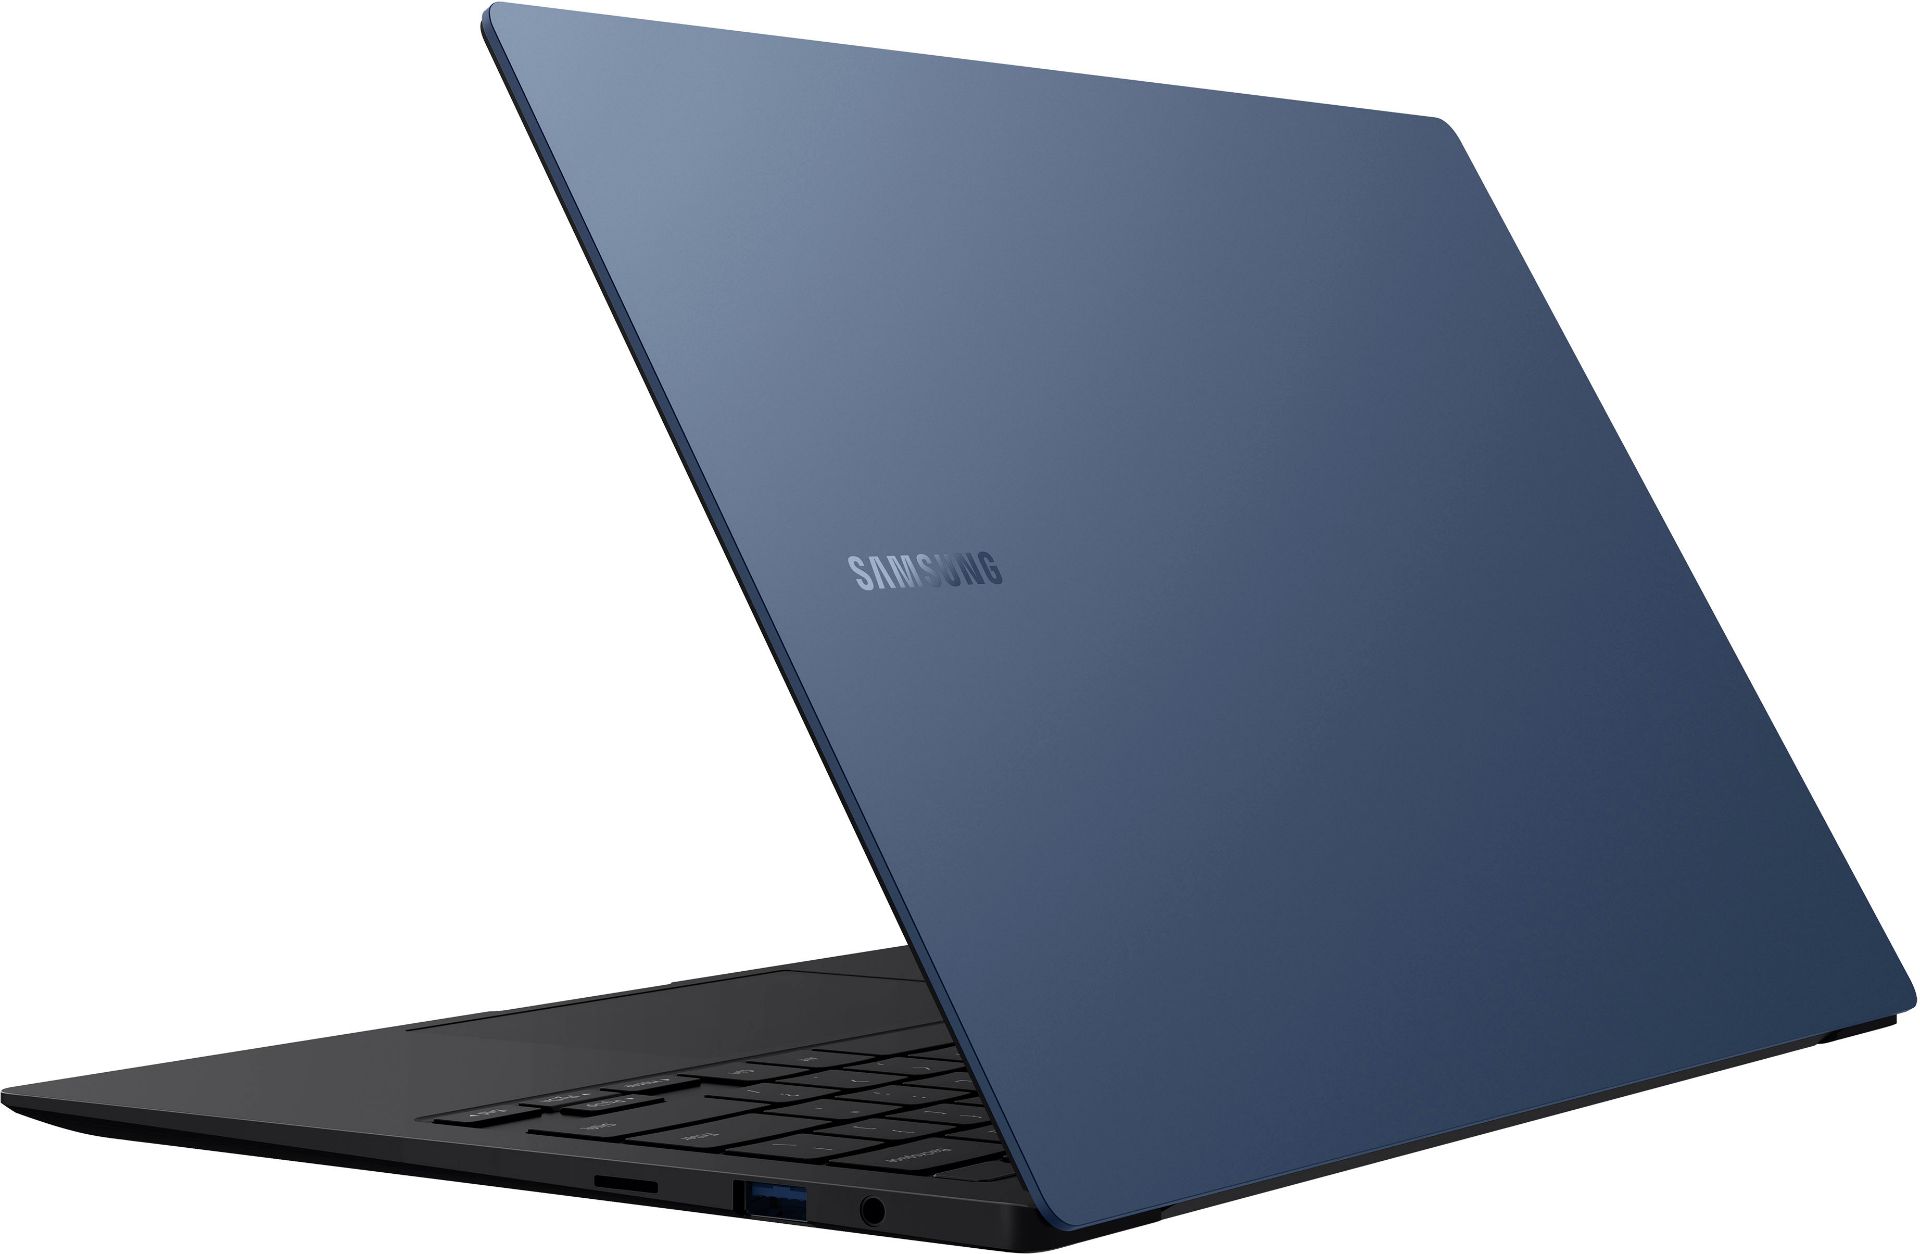 BRAND NEW FACTORY SEALED SAMSUNG Galaxy Book Pro 13 INCH Laptop. RRP £699. Intel Core i5, 8GB RAM, - Image 3 of 6